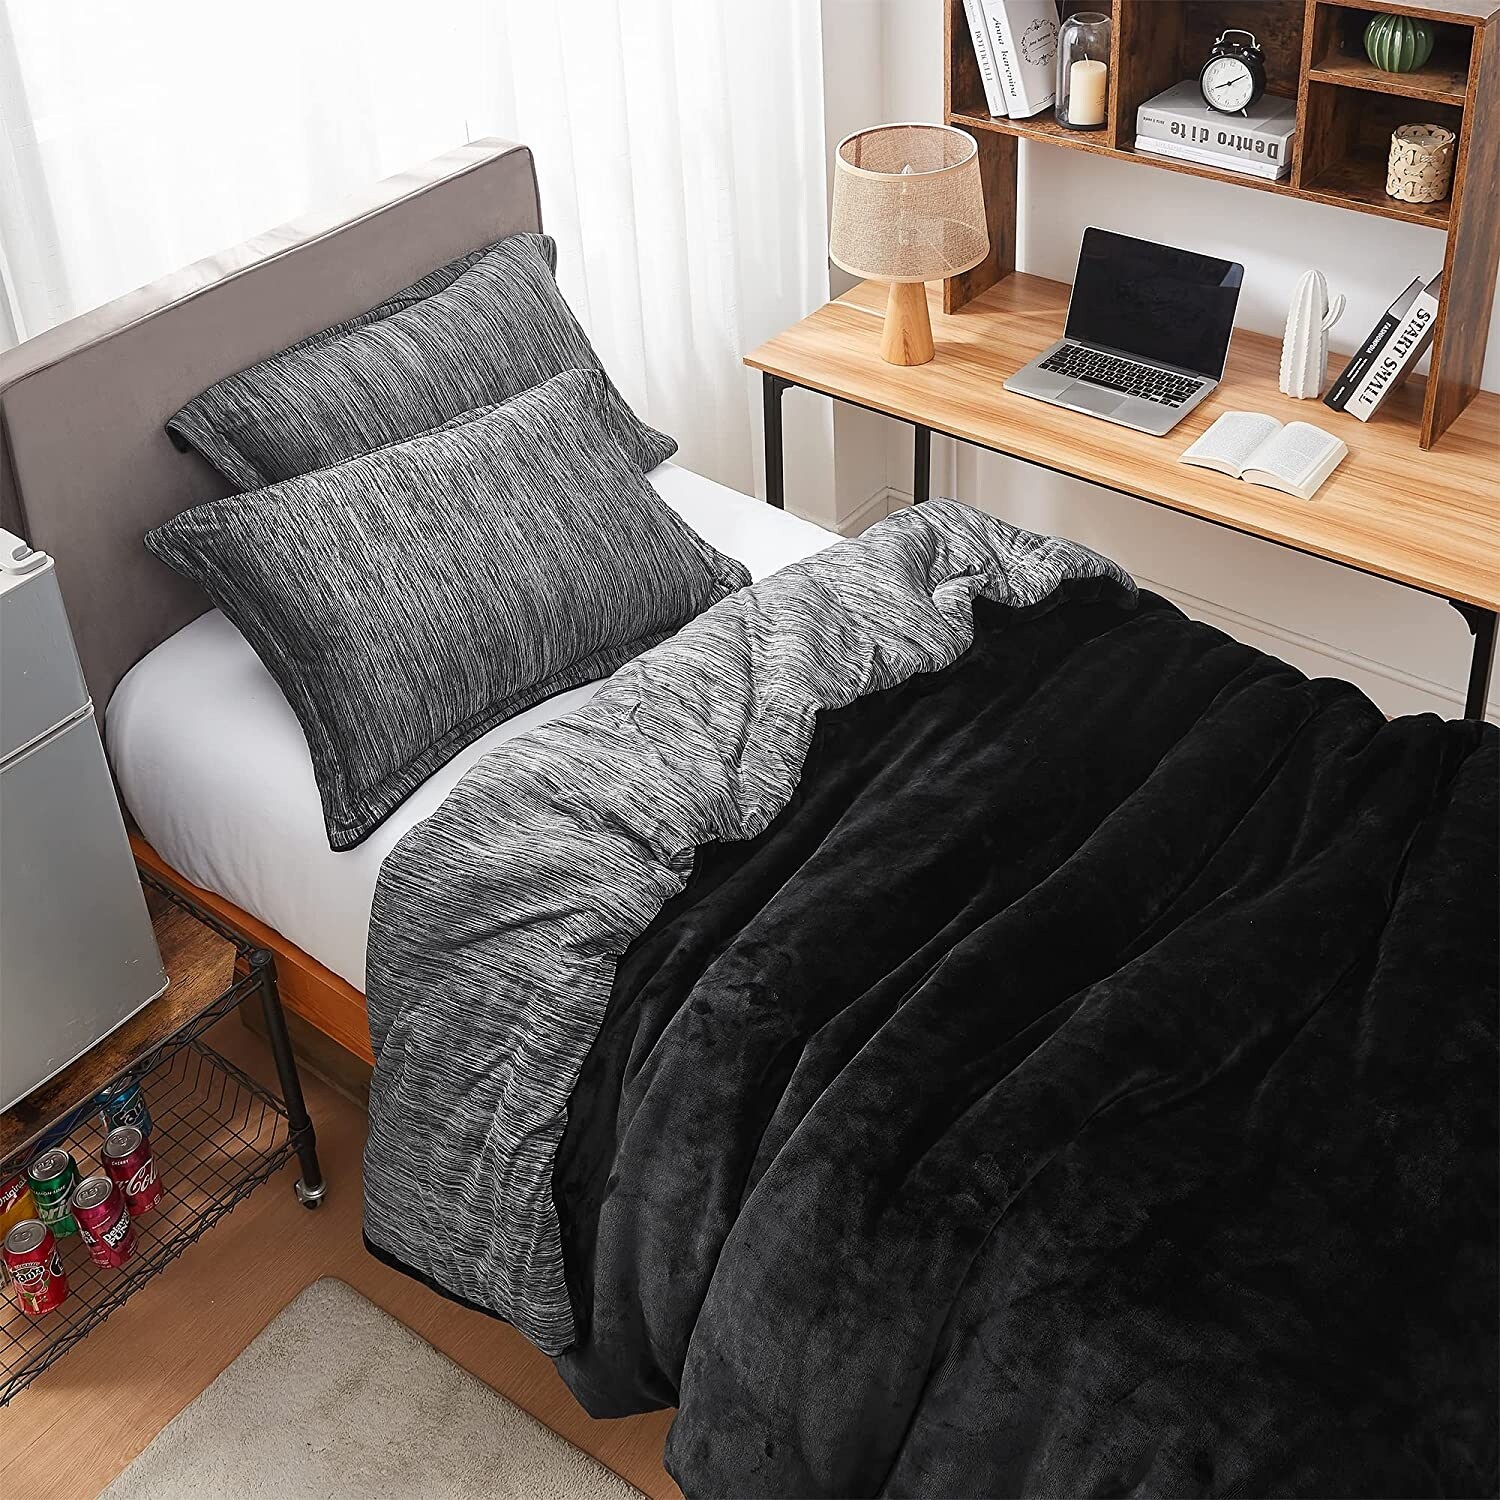 Some Like it Hot - Some Like it Cold - Coma Inducer Oversized Comforter - Black